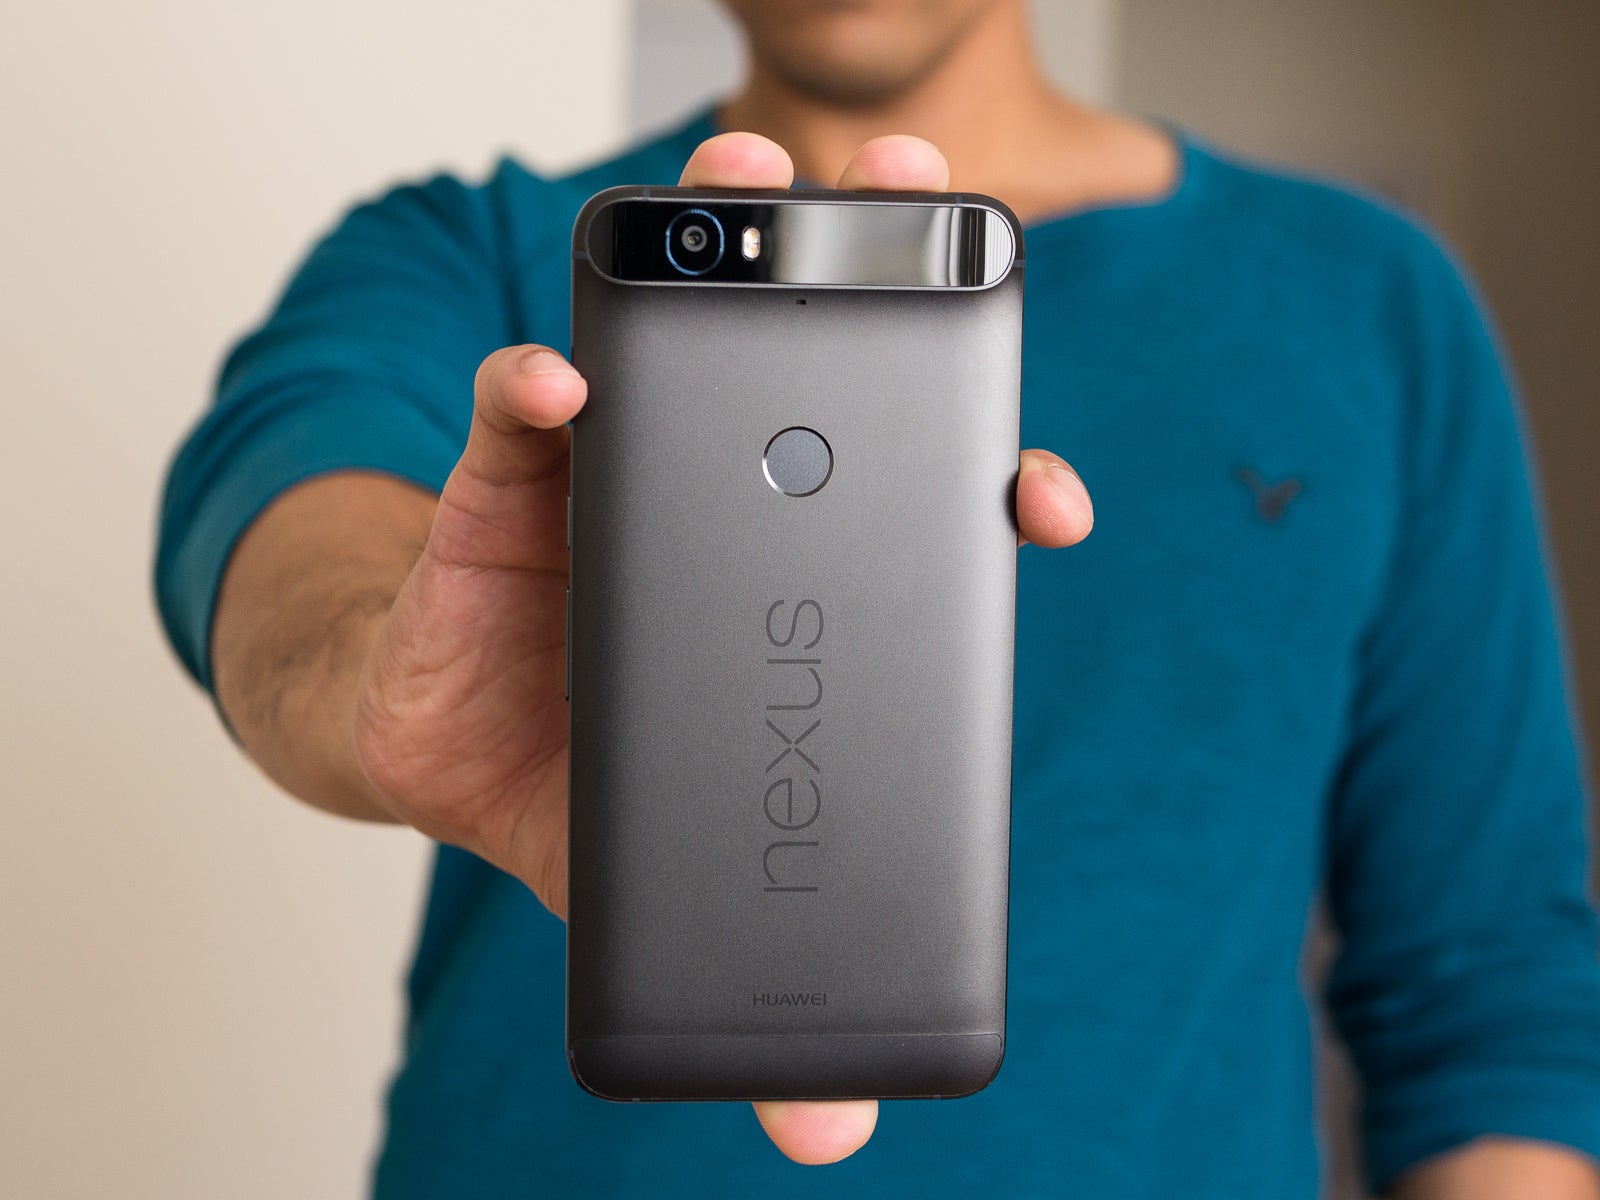 Google Nexus 6P&#039;s legacy lives on - iPhone 13, Galaxy S22 Ultra, and Pixel 6: new designs or blasts from the past?